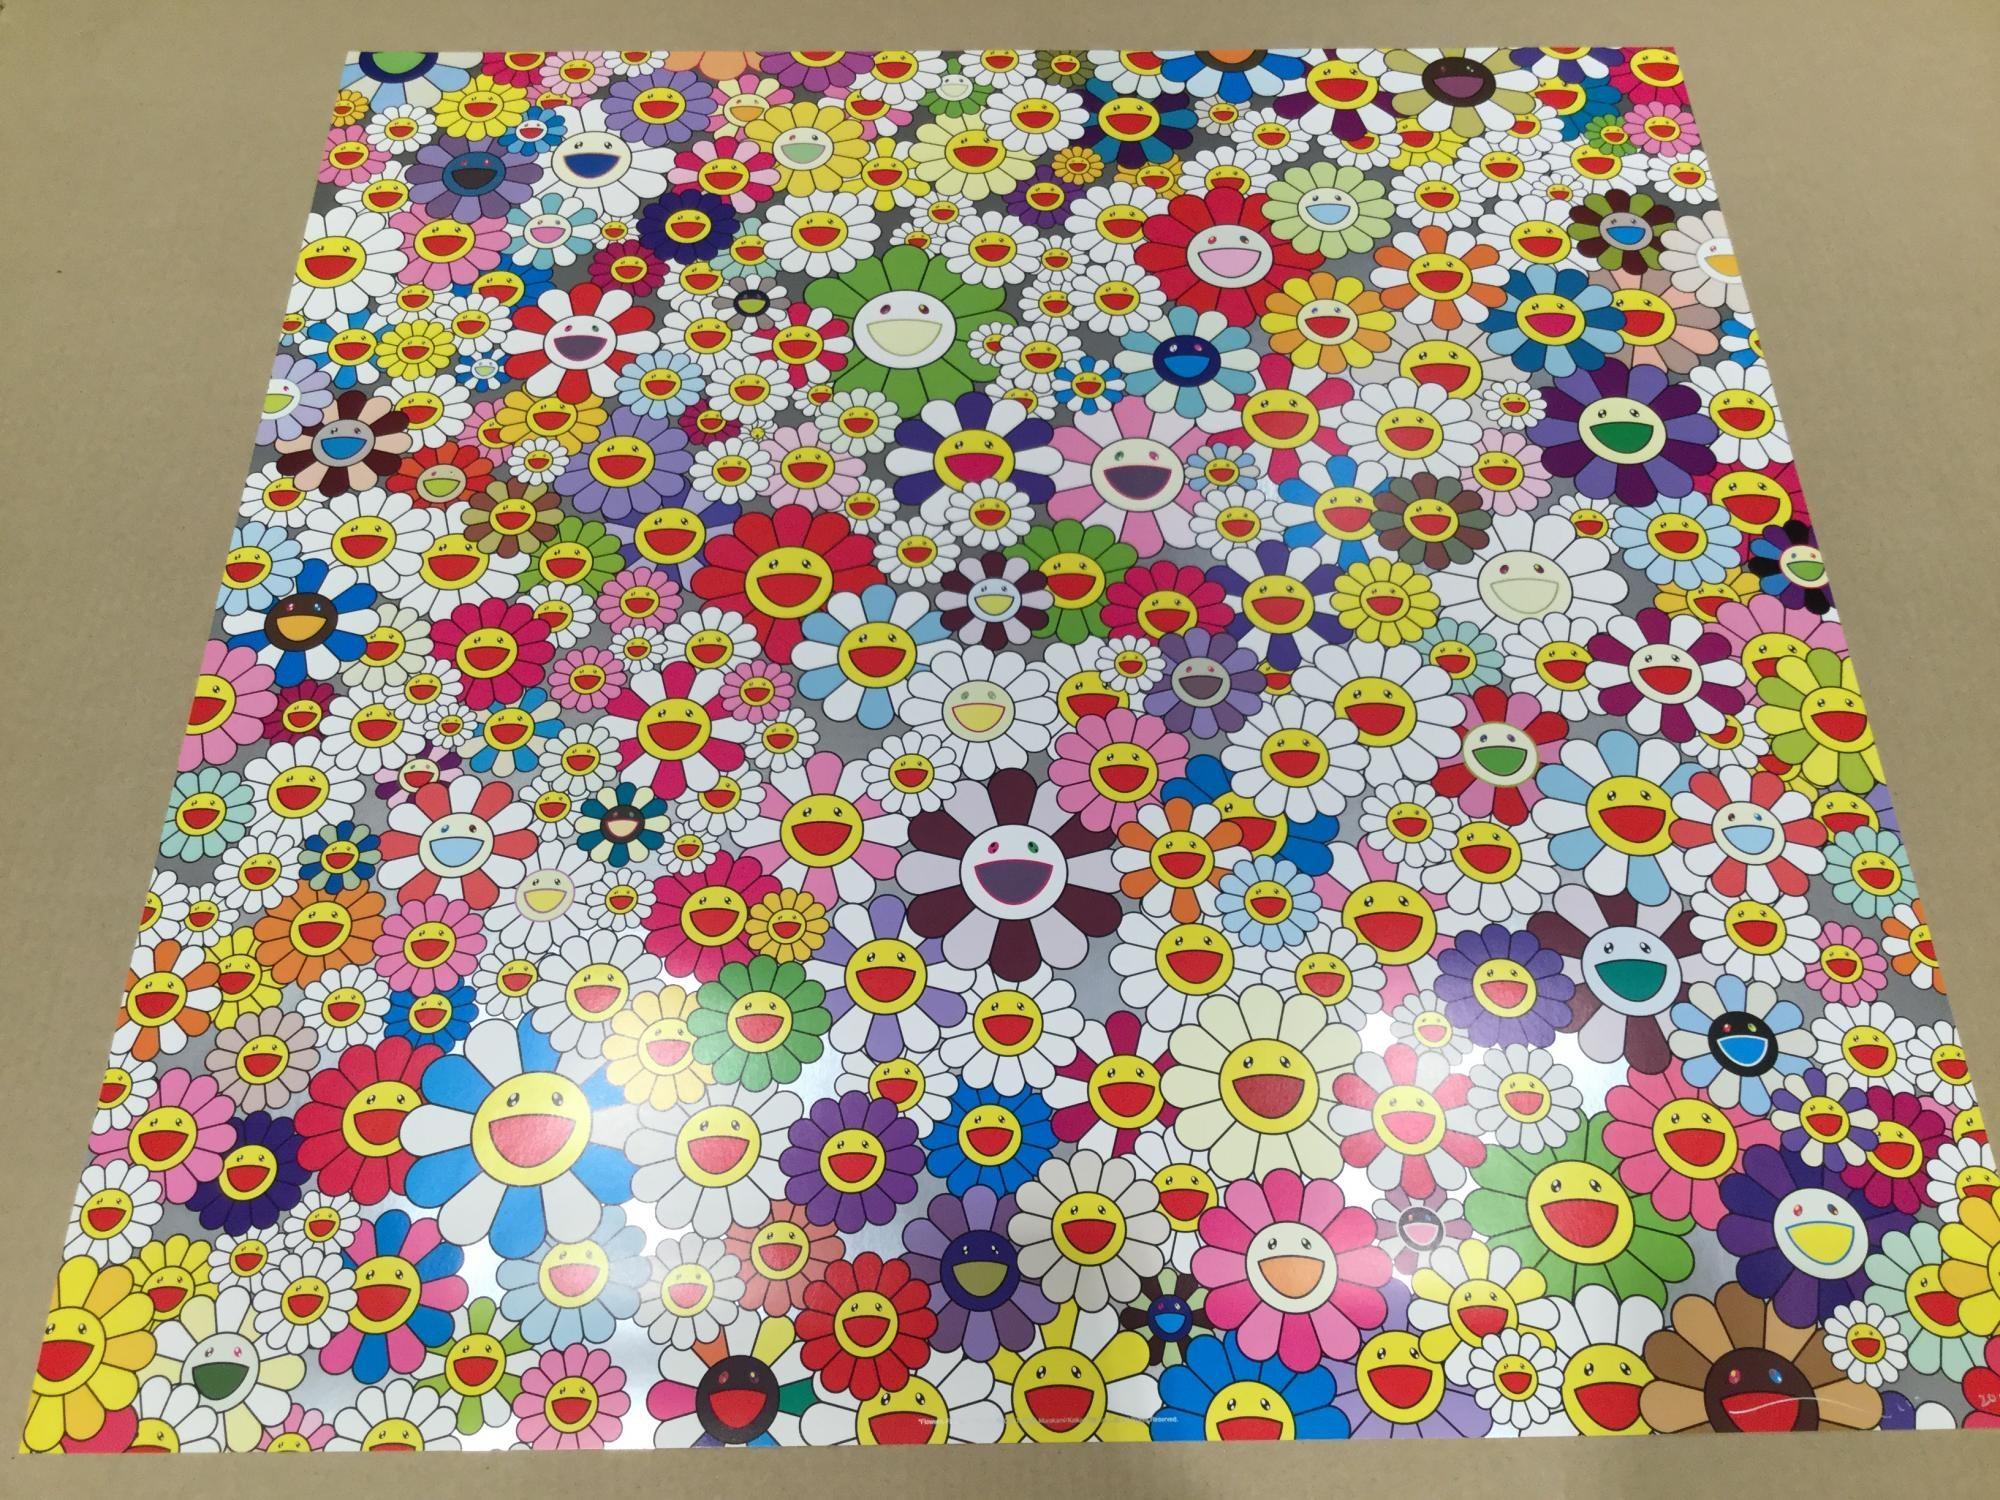 Flowers, Flowers, Flowers. Limited Edition signed and numbered by Murakami - Print by Takashi Murakami